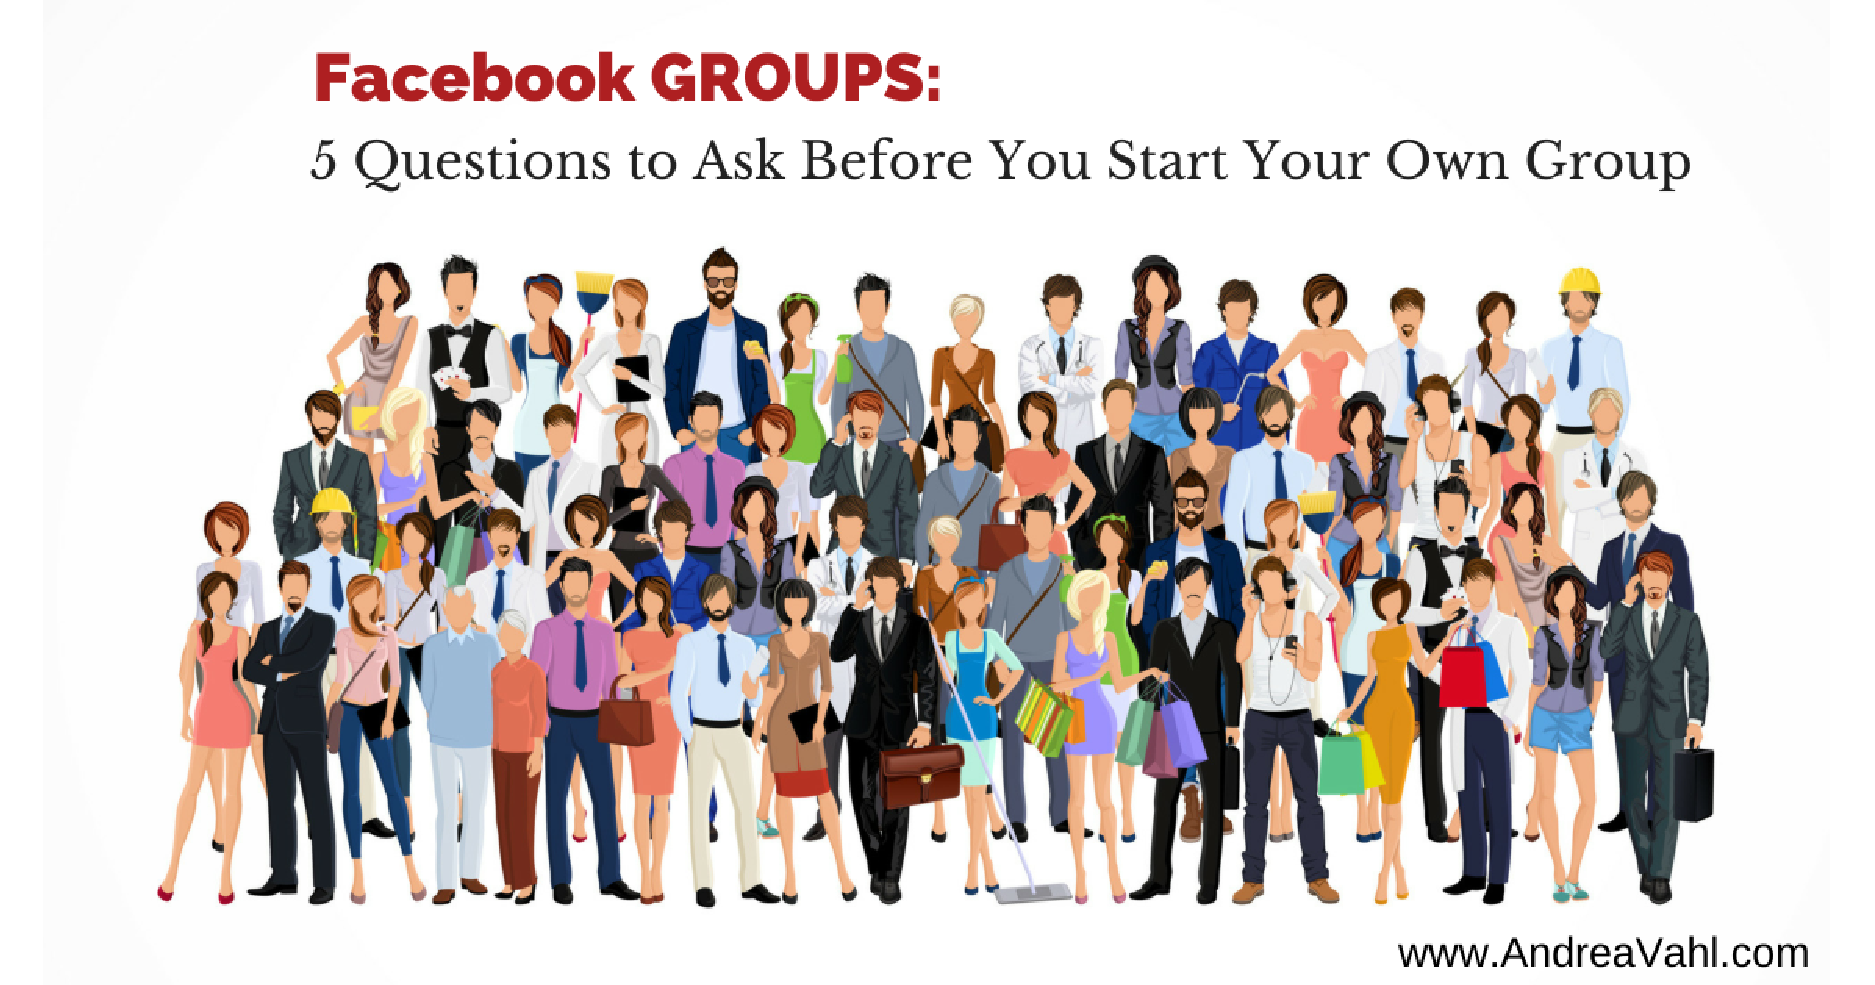 Facebook Groups: 5 Questions to Ask Before You Start Your Own Group